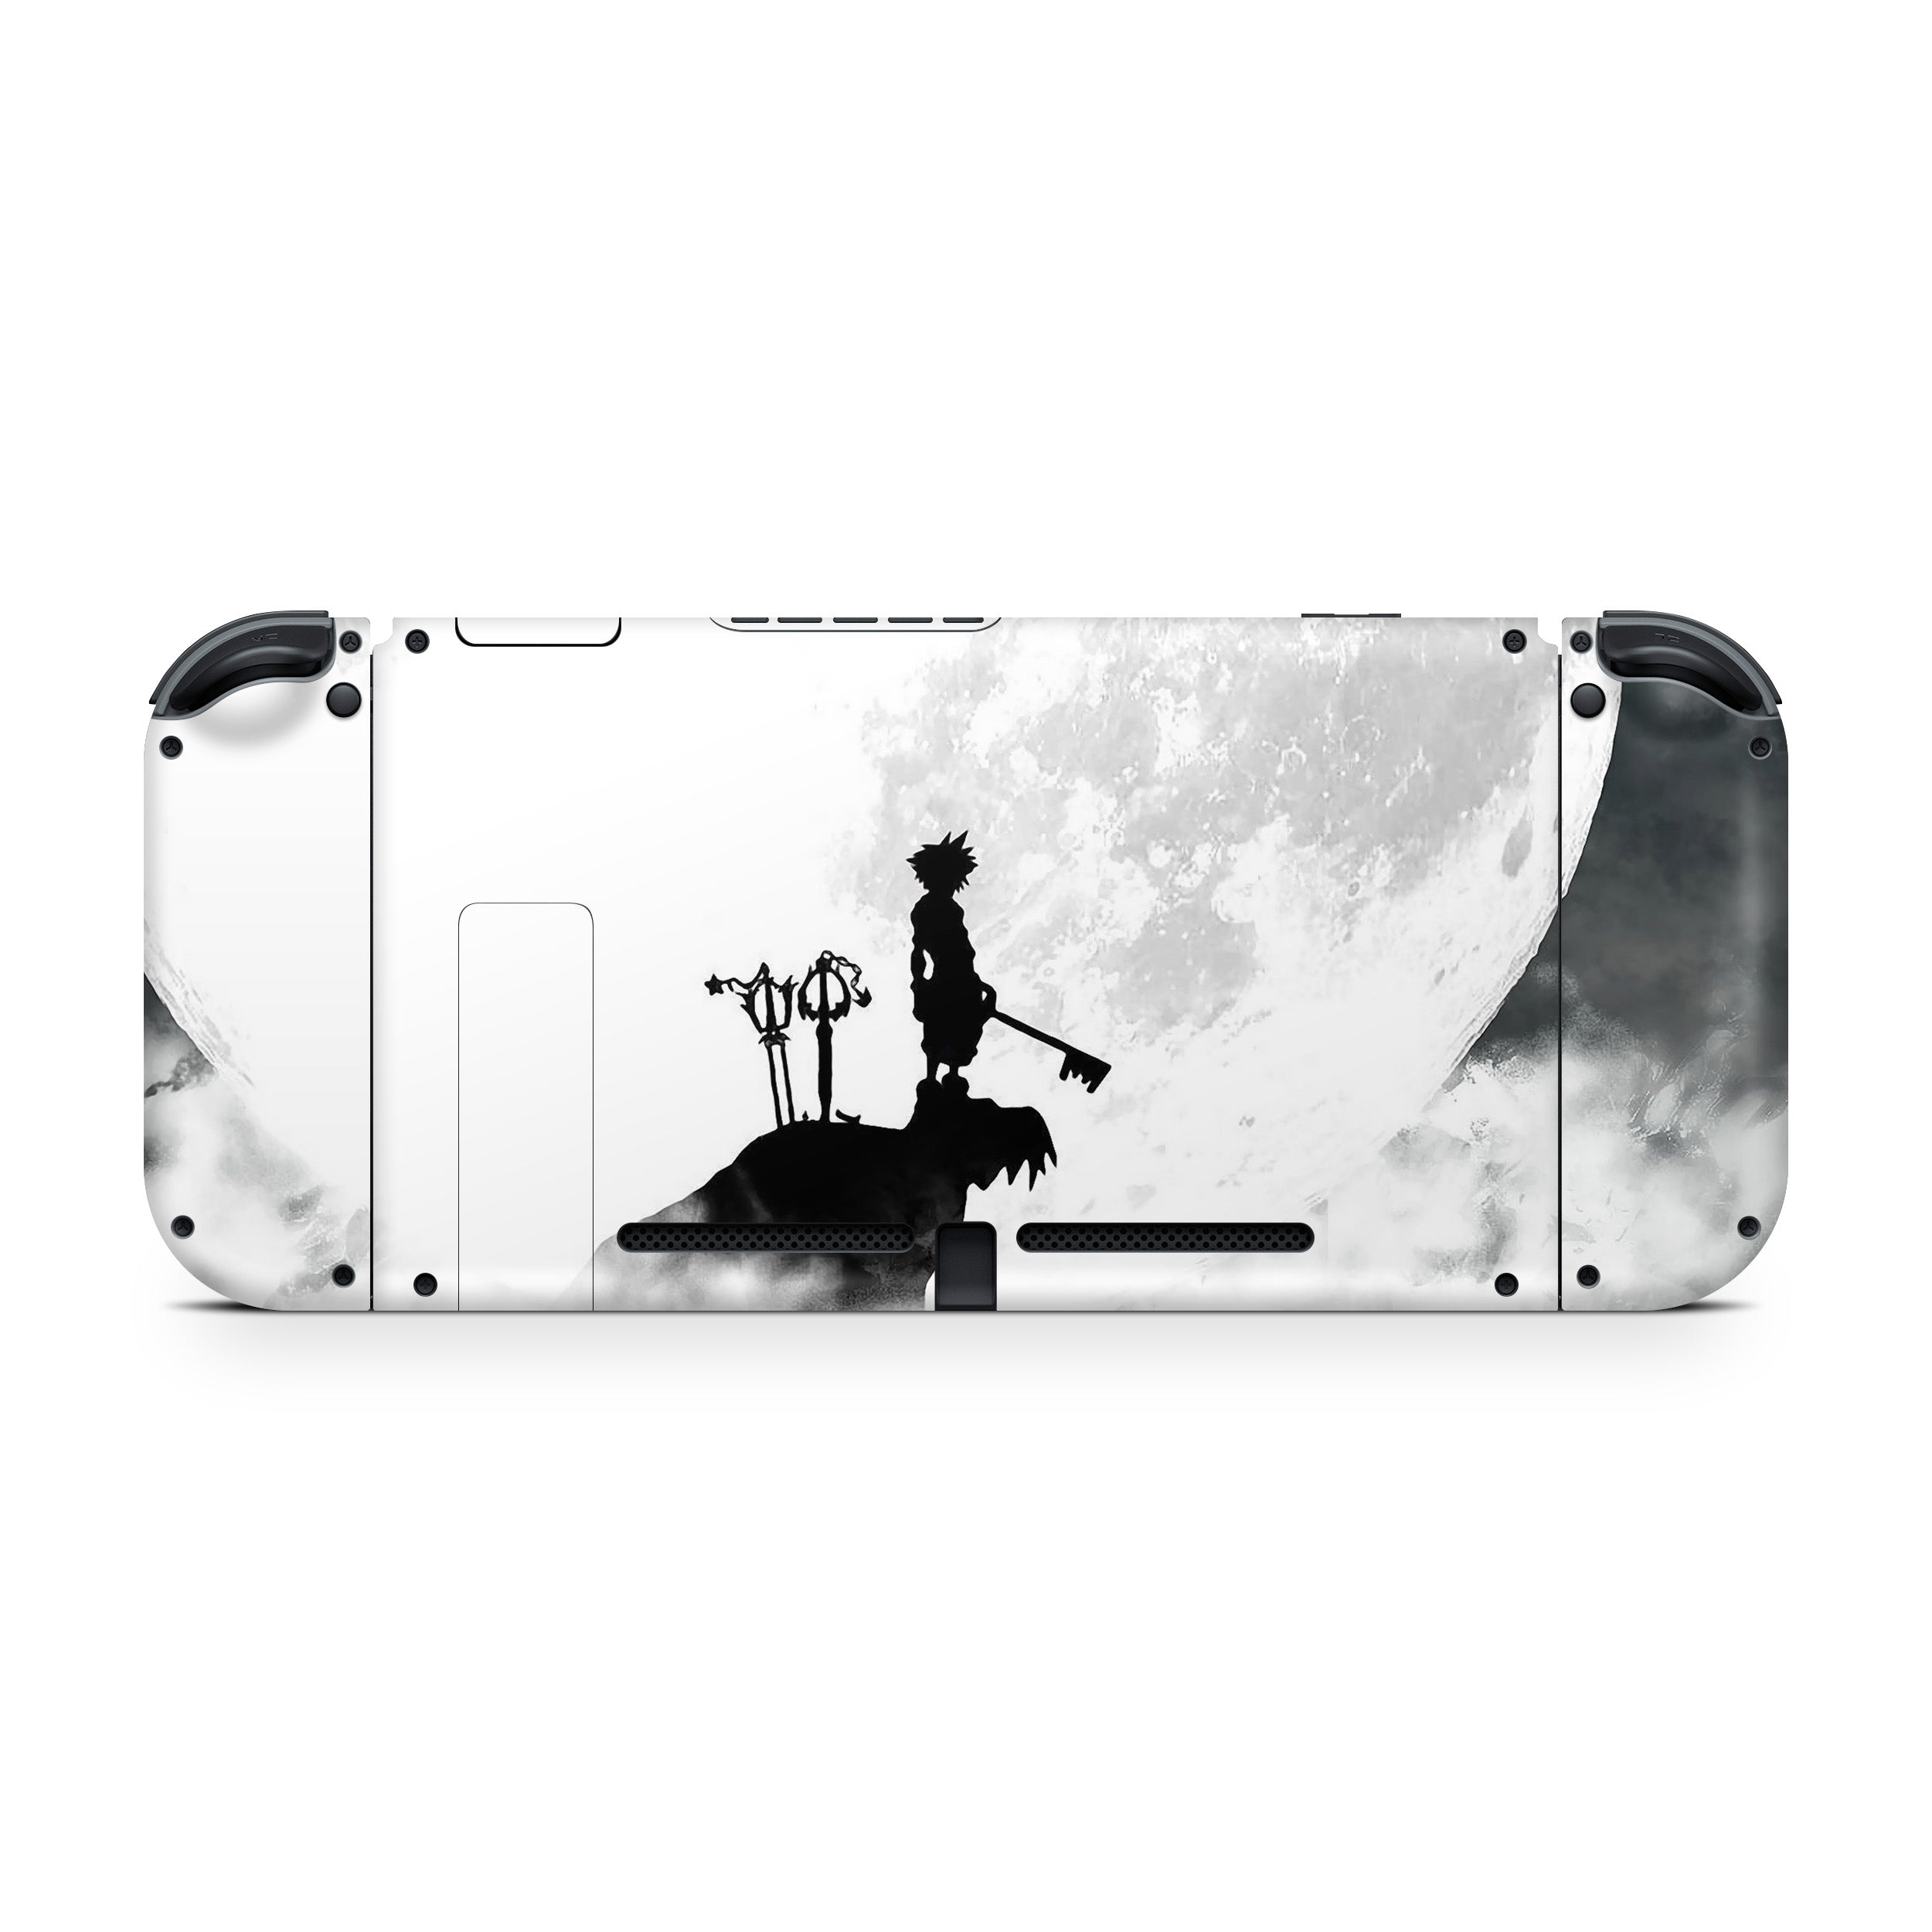 A video game skin featuring a Kingdom Hearts design for the Nintendo Switch.